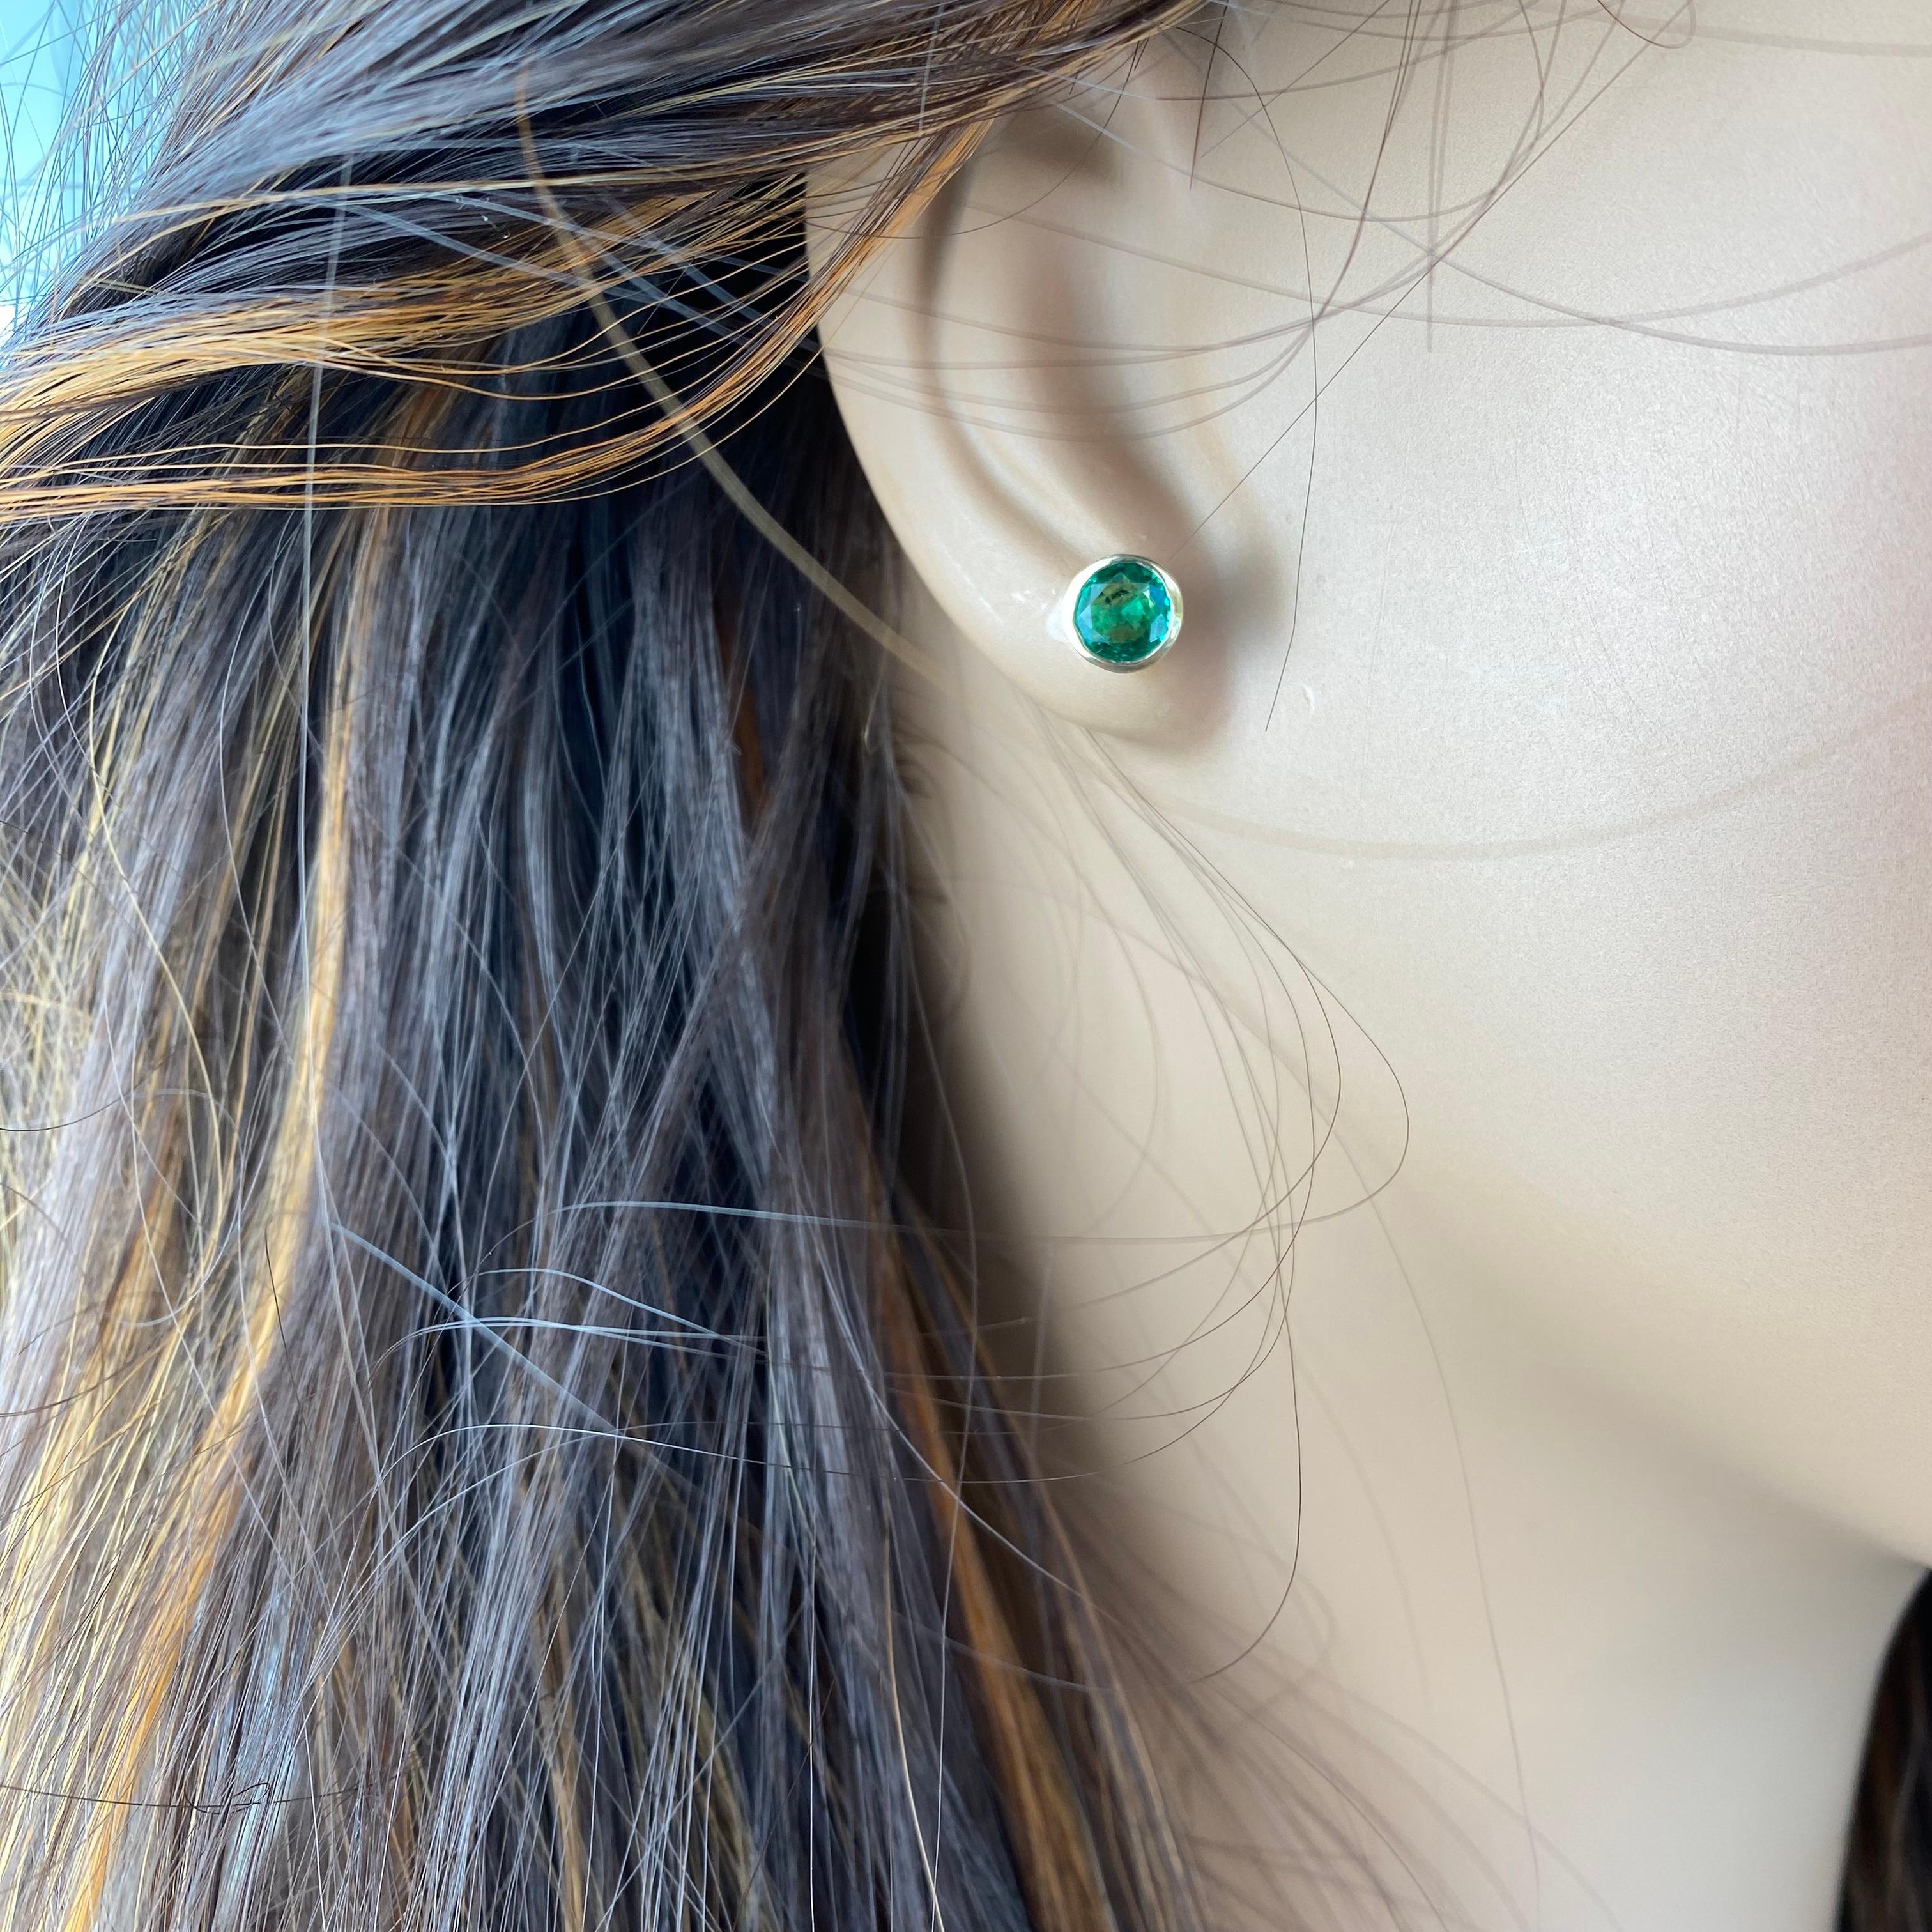 Indulge in the timeless elegance of these exquisite 14 Karat Yellow Gold Bezel Set Matched Pair Round Emerald Earrings. Each earring boasts a mesmerizing round Zambian emerald, meticulously bezel set to highlight its natural beauty and